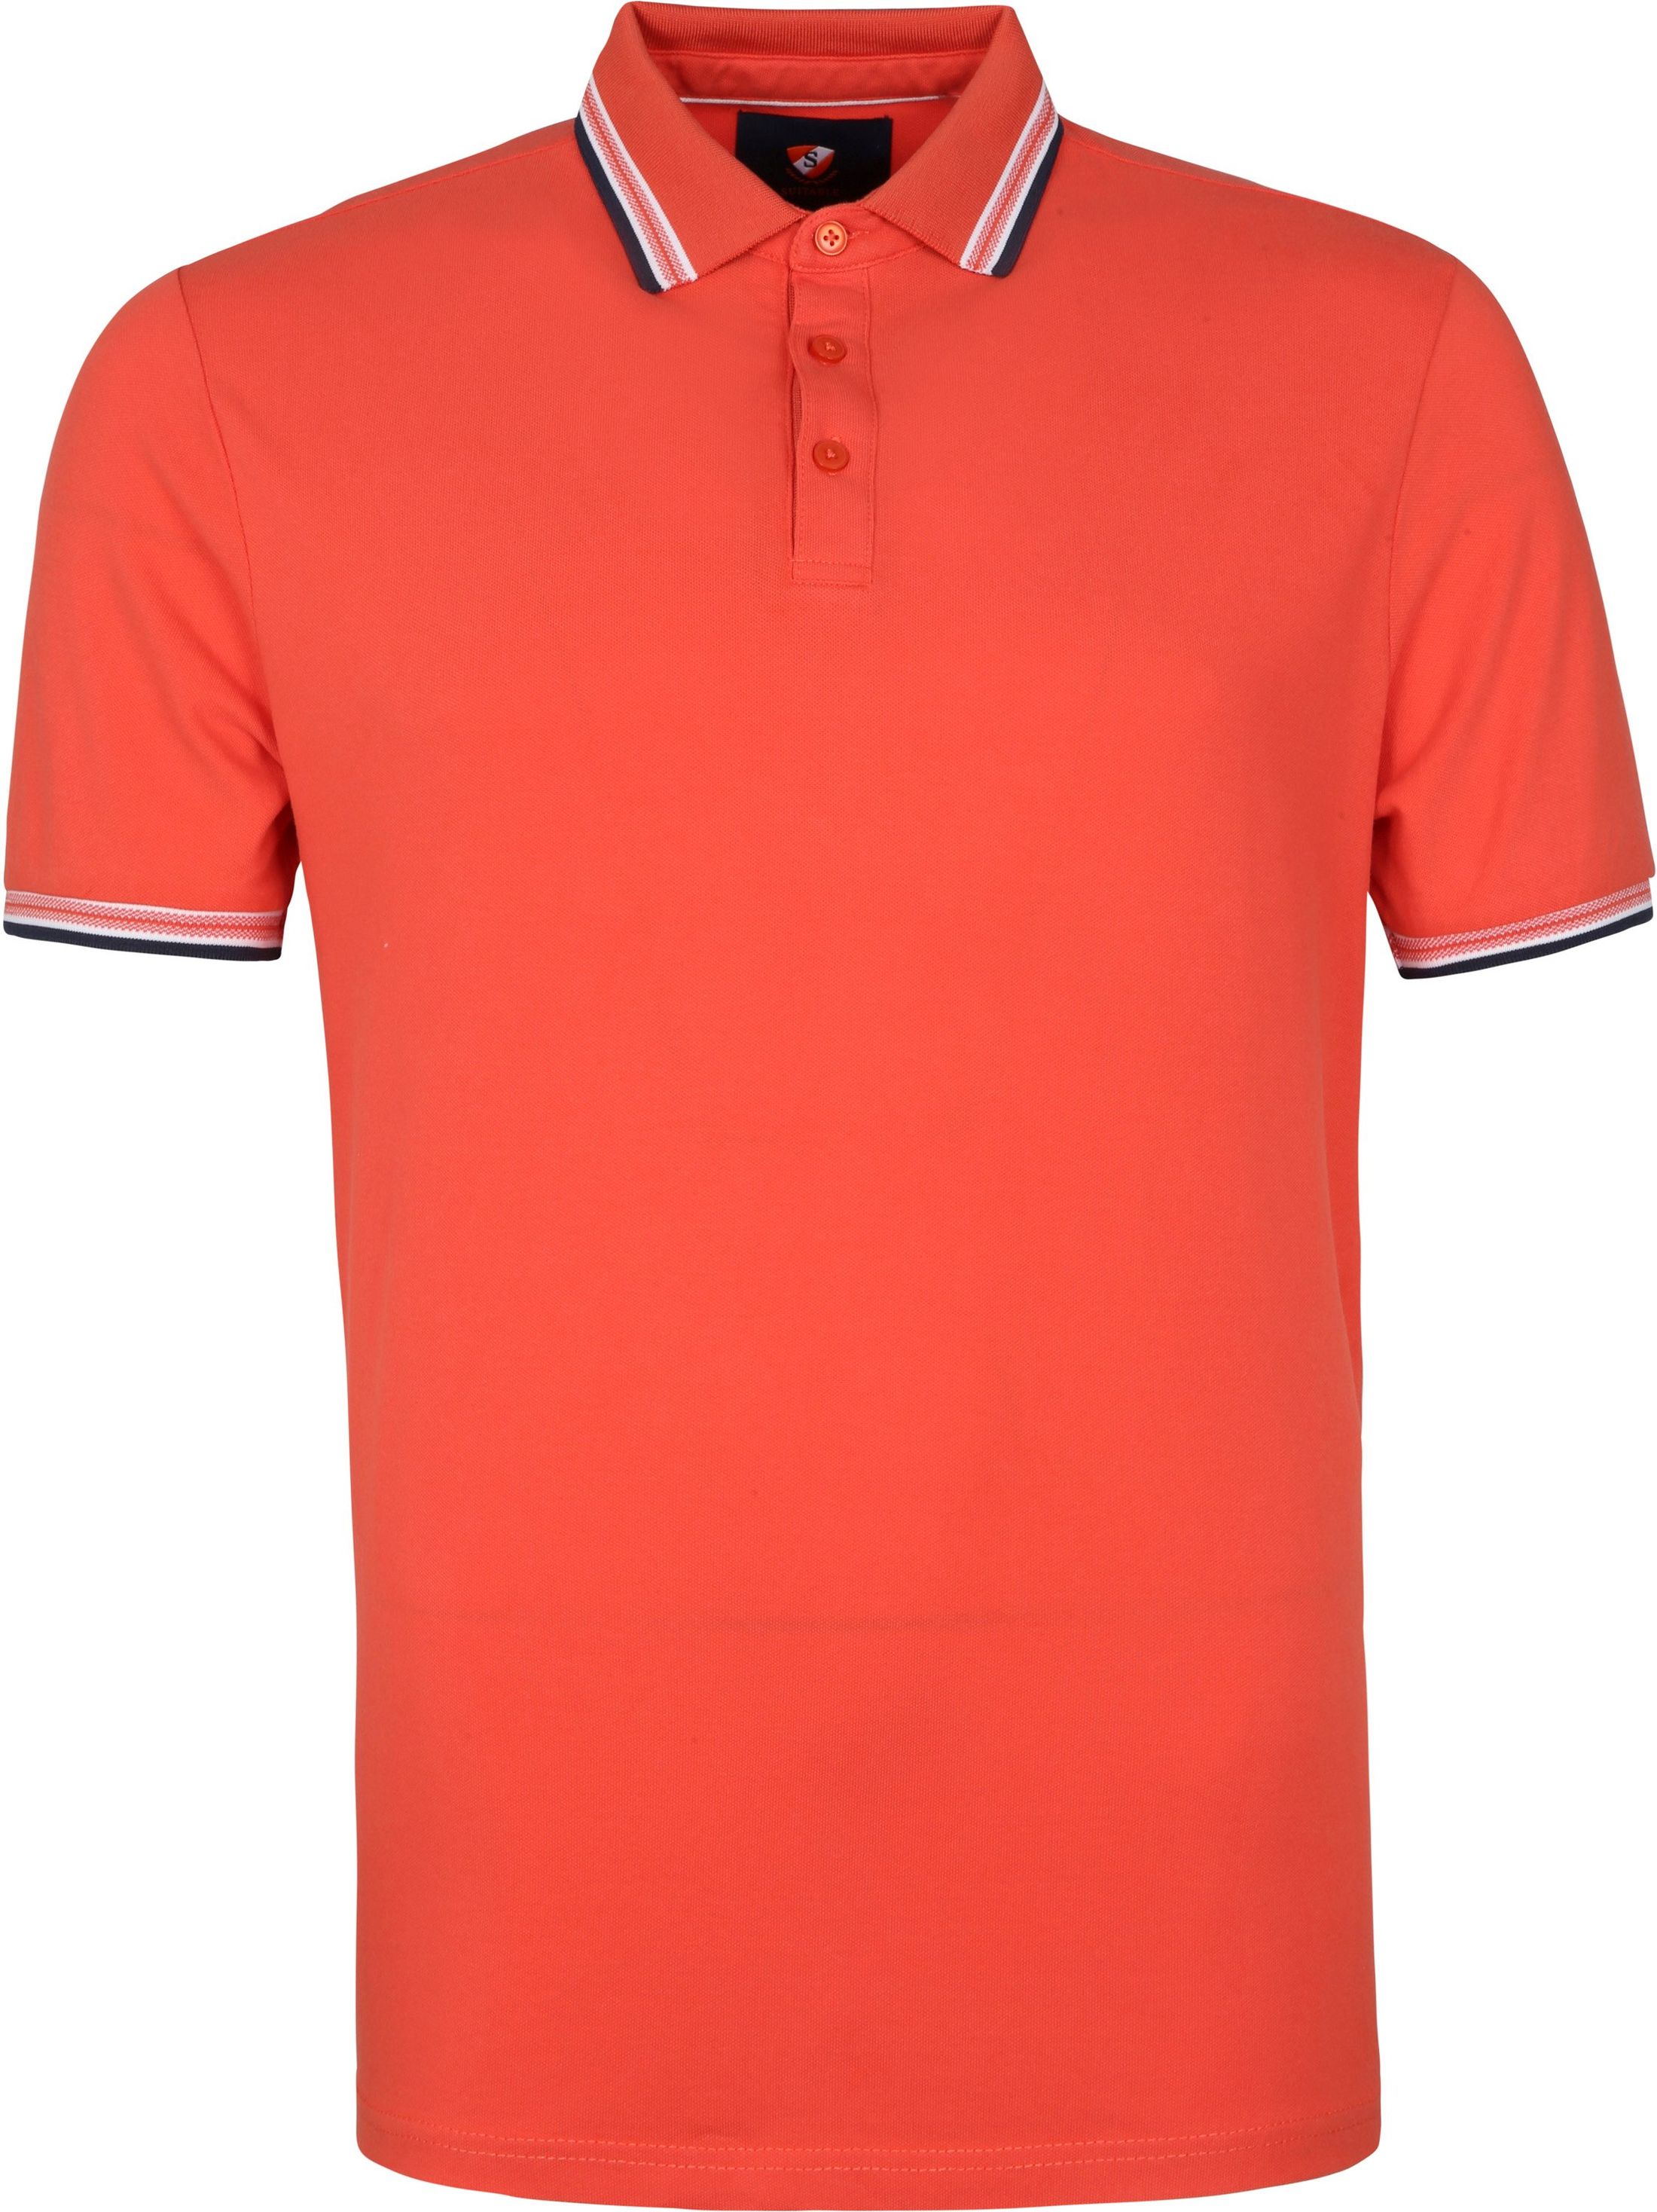 Suitable Poloshirt Brick Red size 3XL